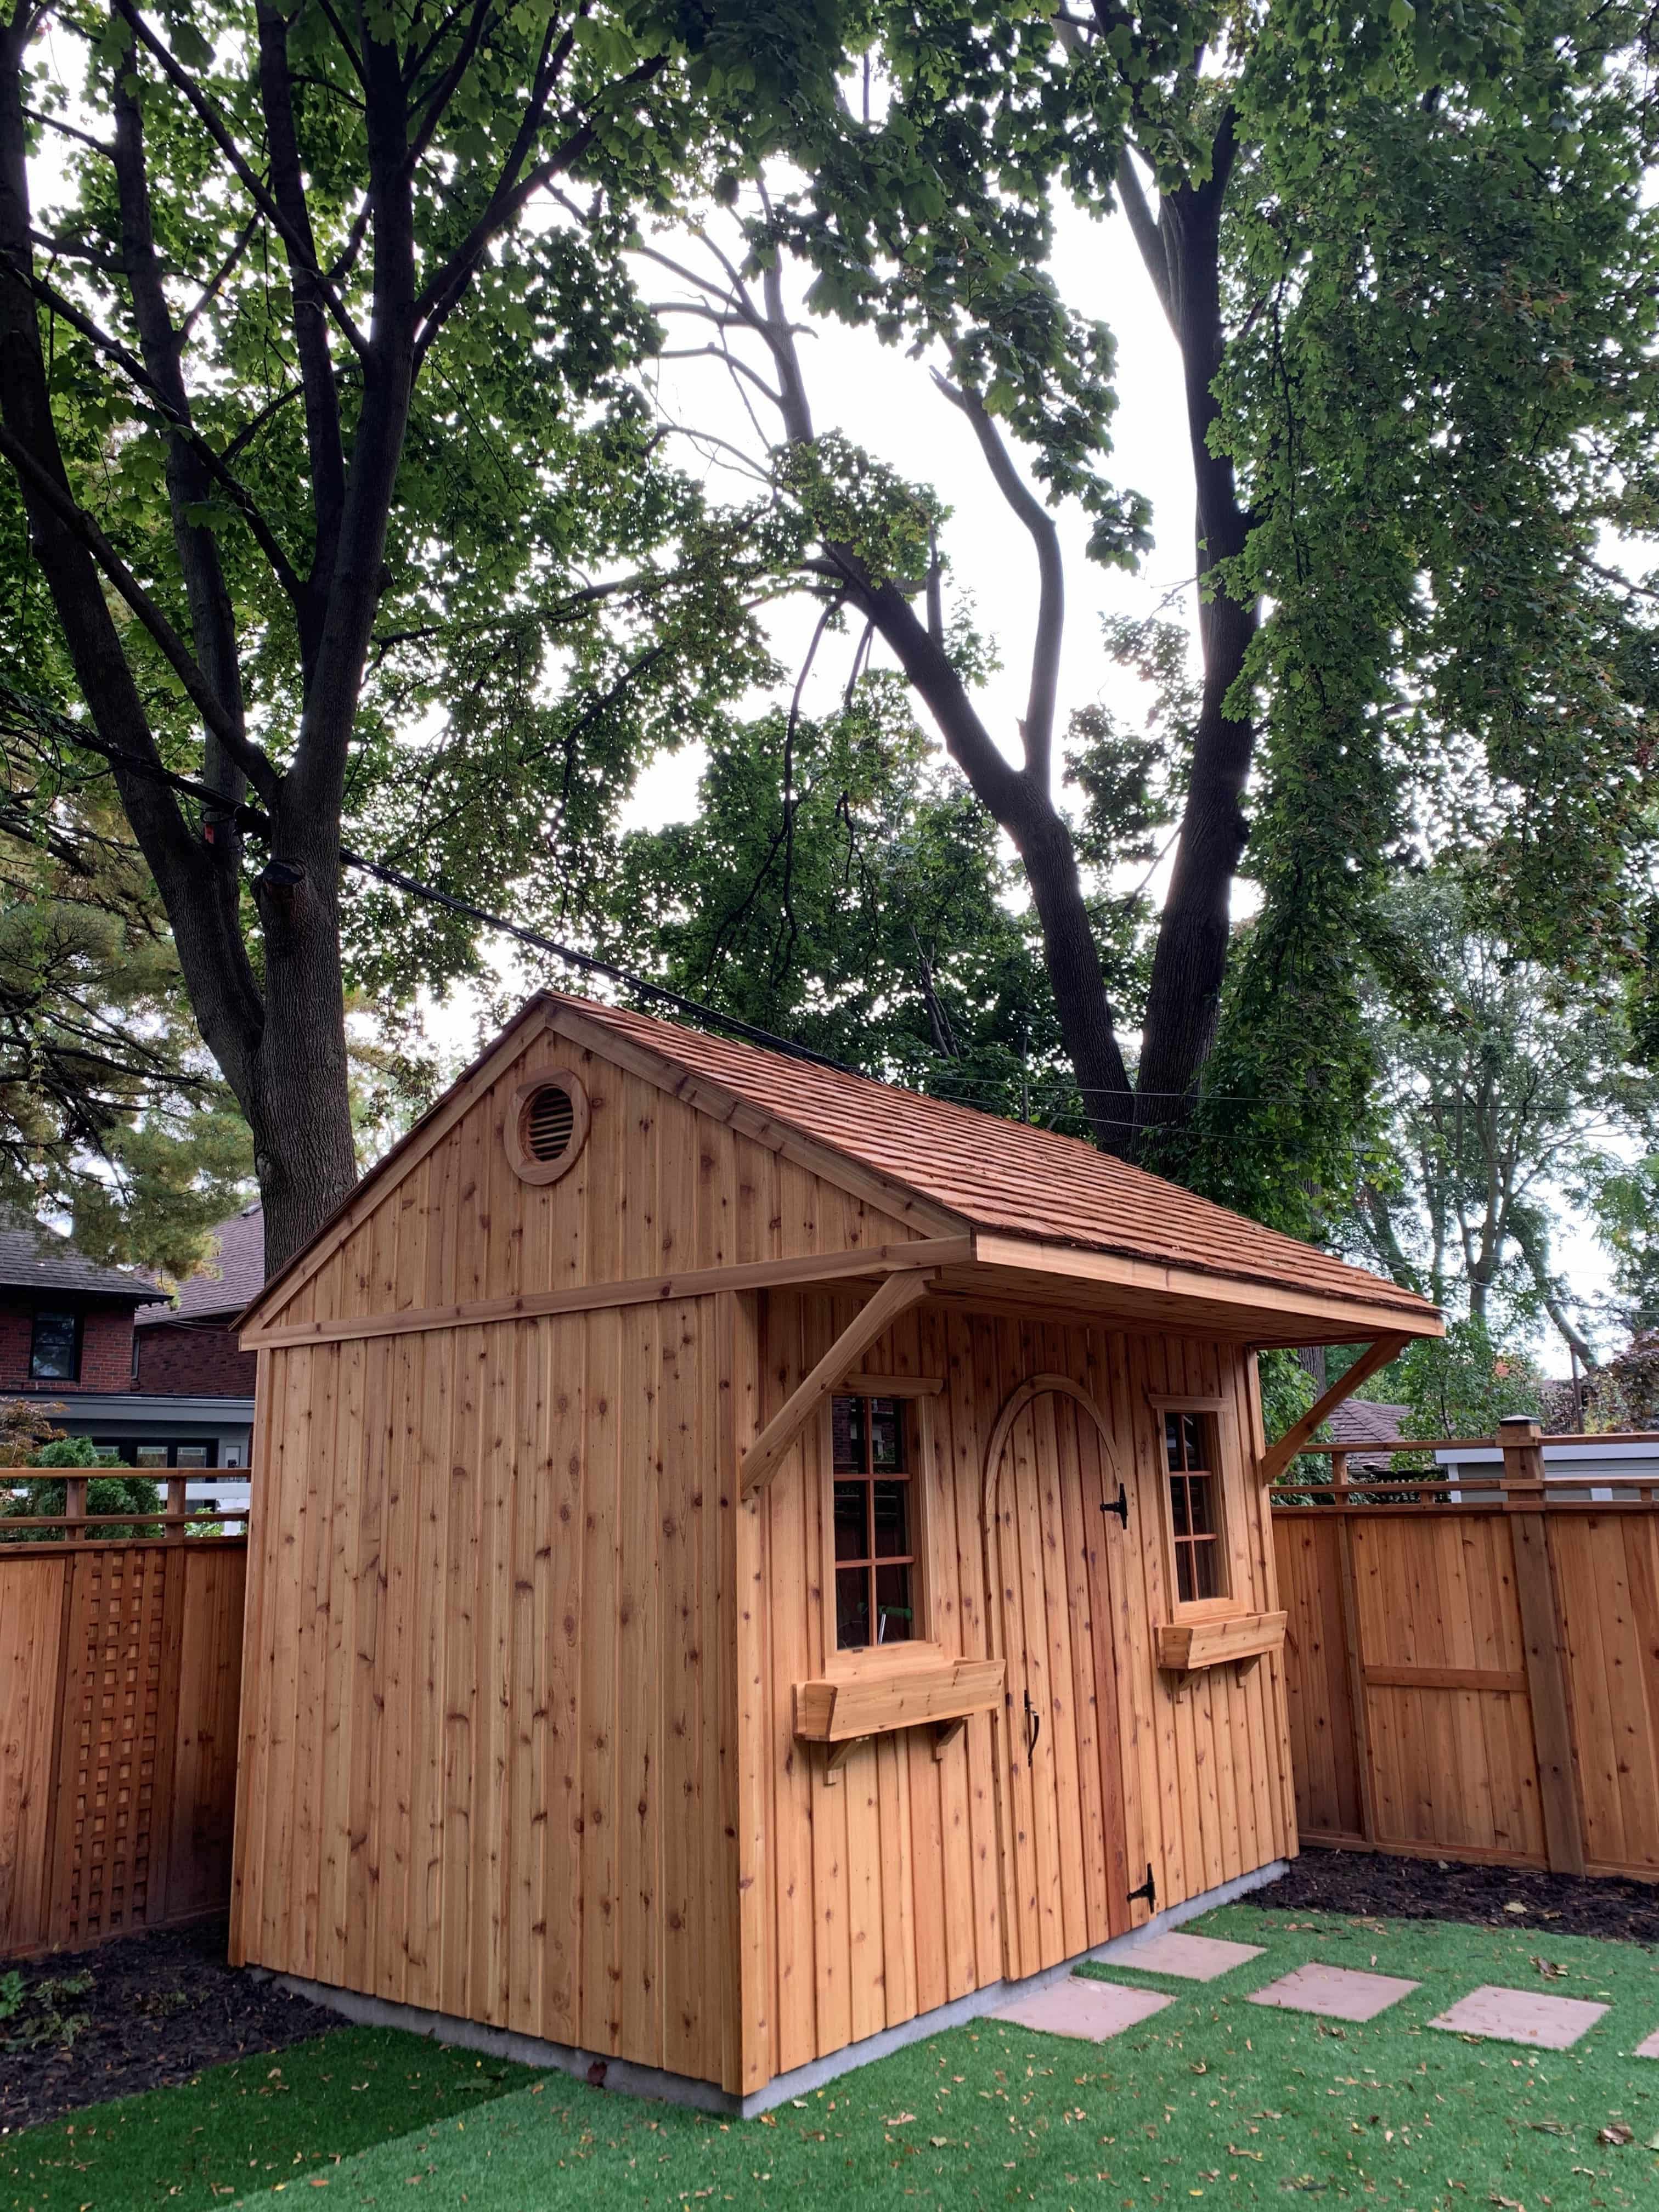 Side view of 8’ x 12' Glen Echo Garden Shed located in Etobicoke, Ontario – Summerwood Products